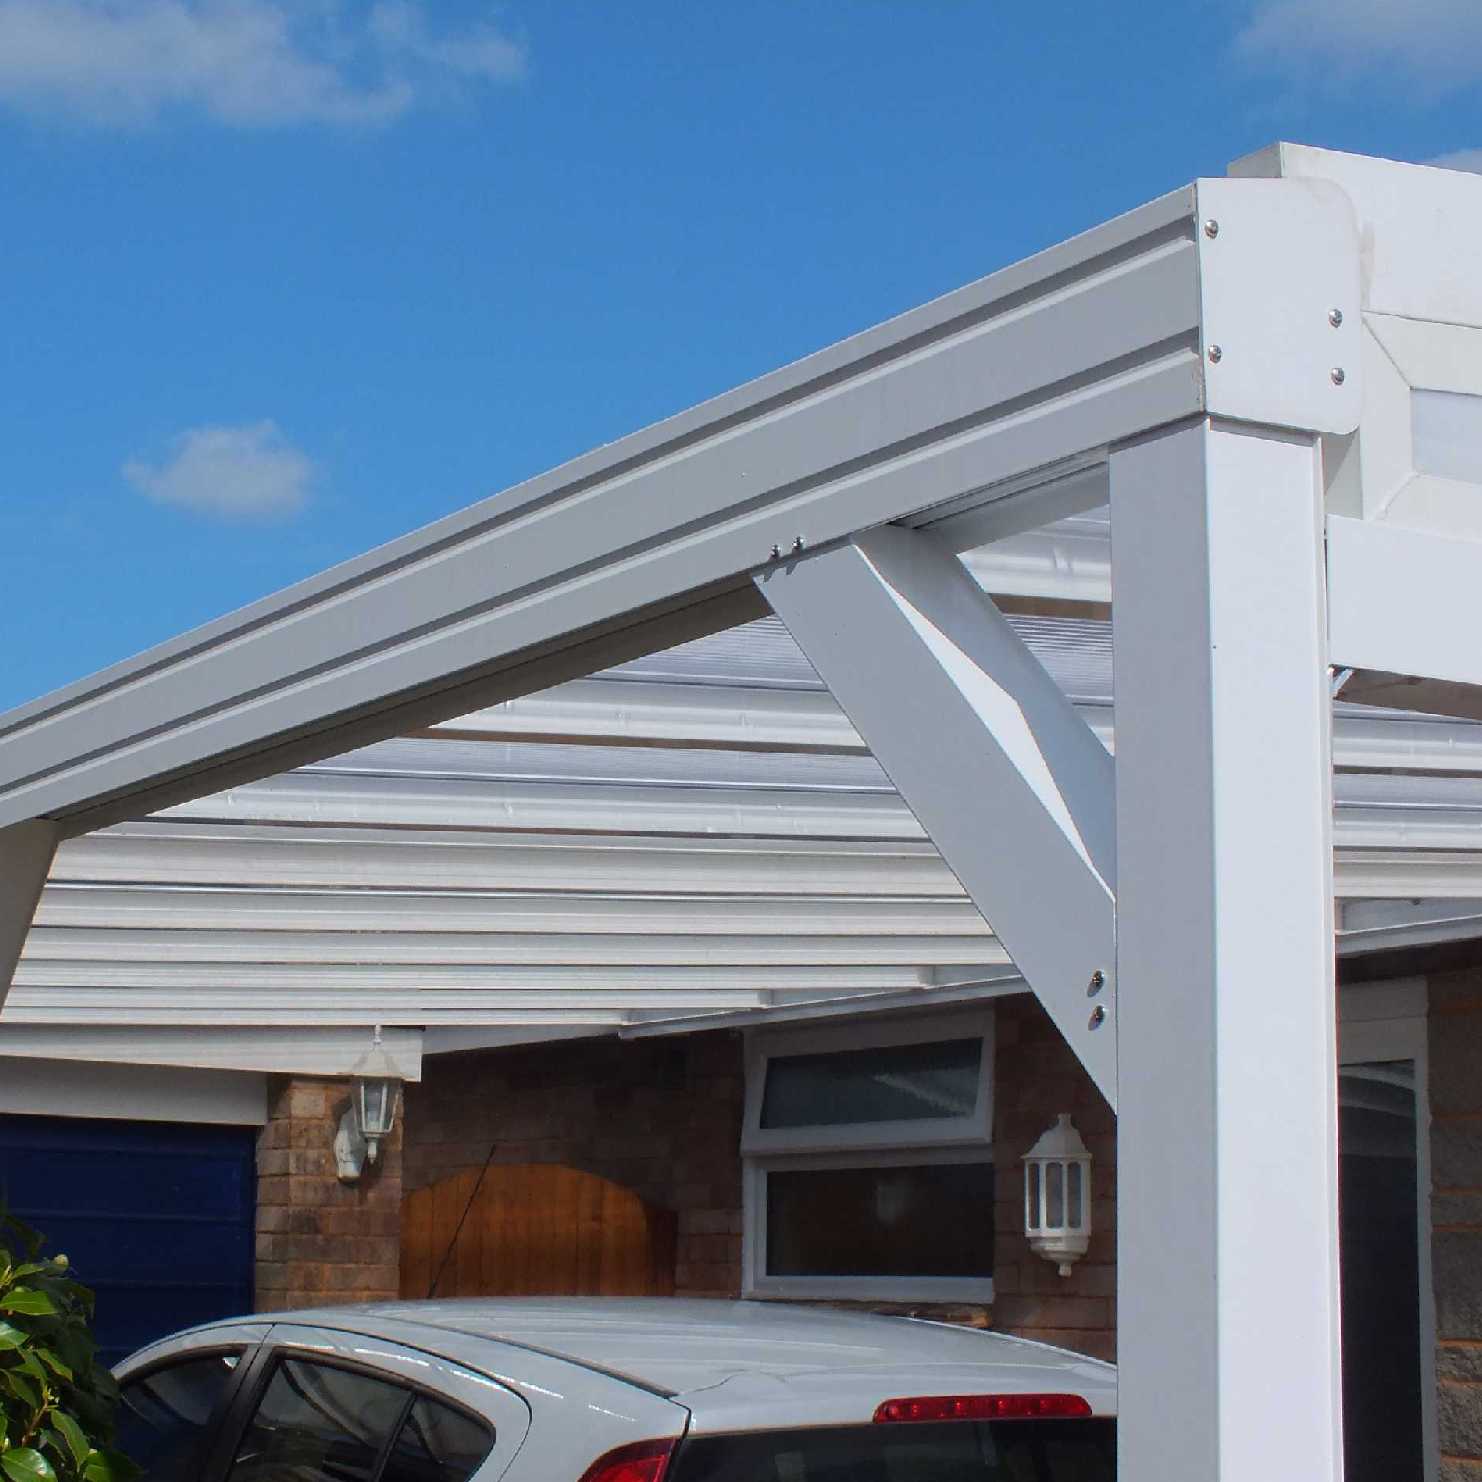 Buy Omega Smart Lean-To Canopy, White with 16mm Polycarbonate Glazing - 5.6m (W) x 3.5m (P), (3) Supporting Posts online today